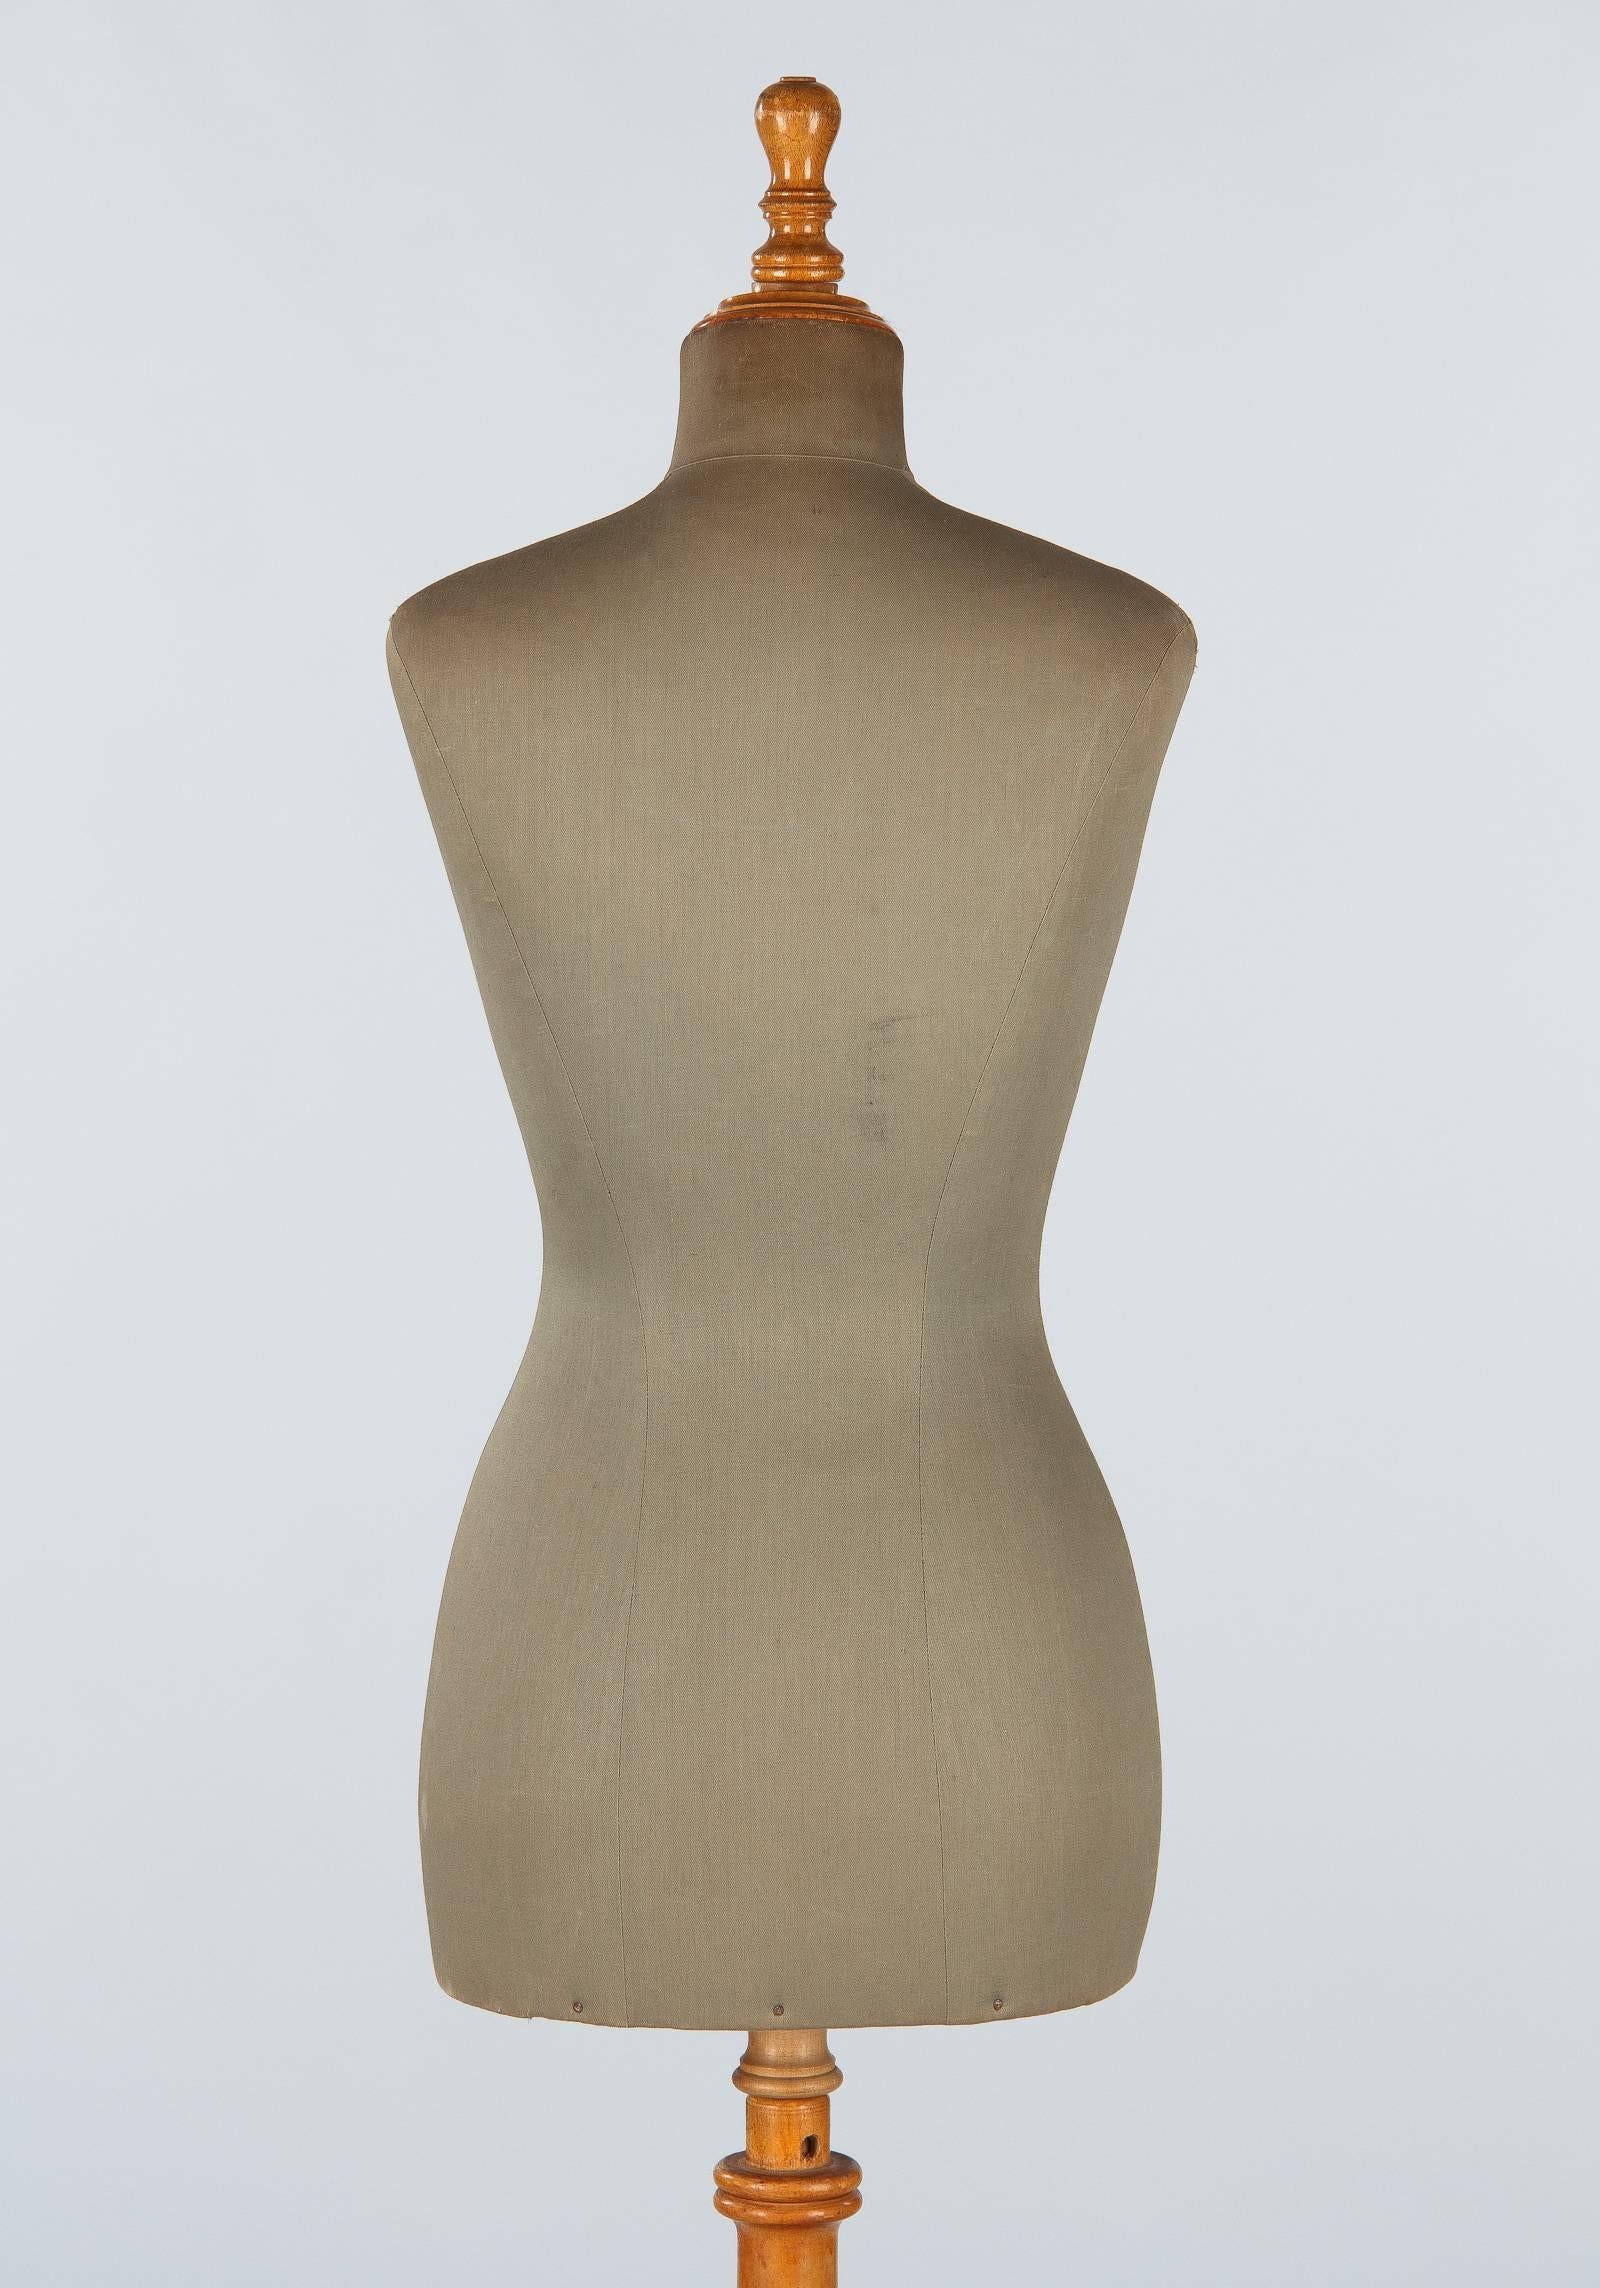 Spanish Dress Form Mannequin by J. Elias Balleste, Early 1900s 4